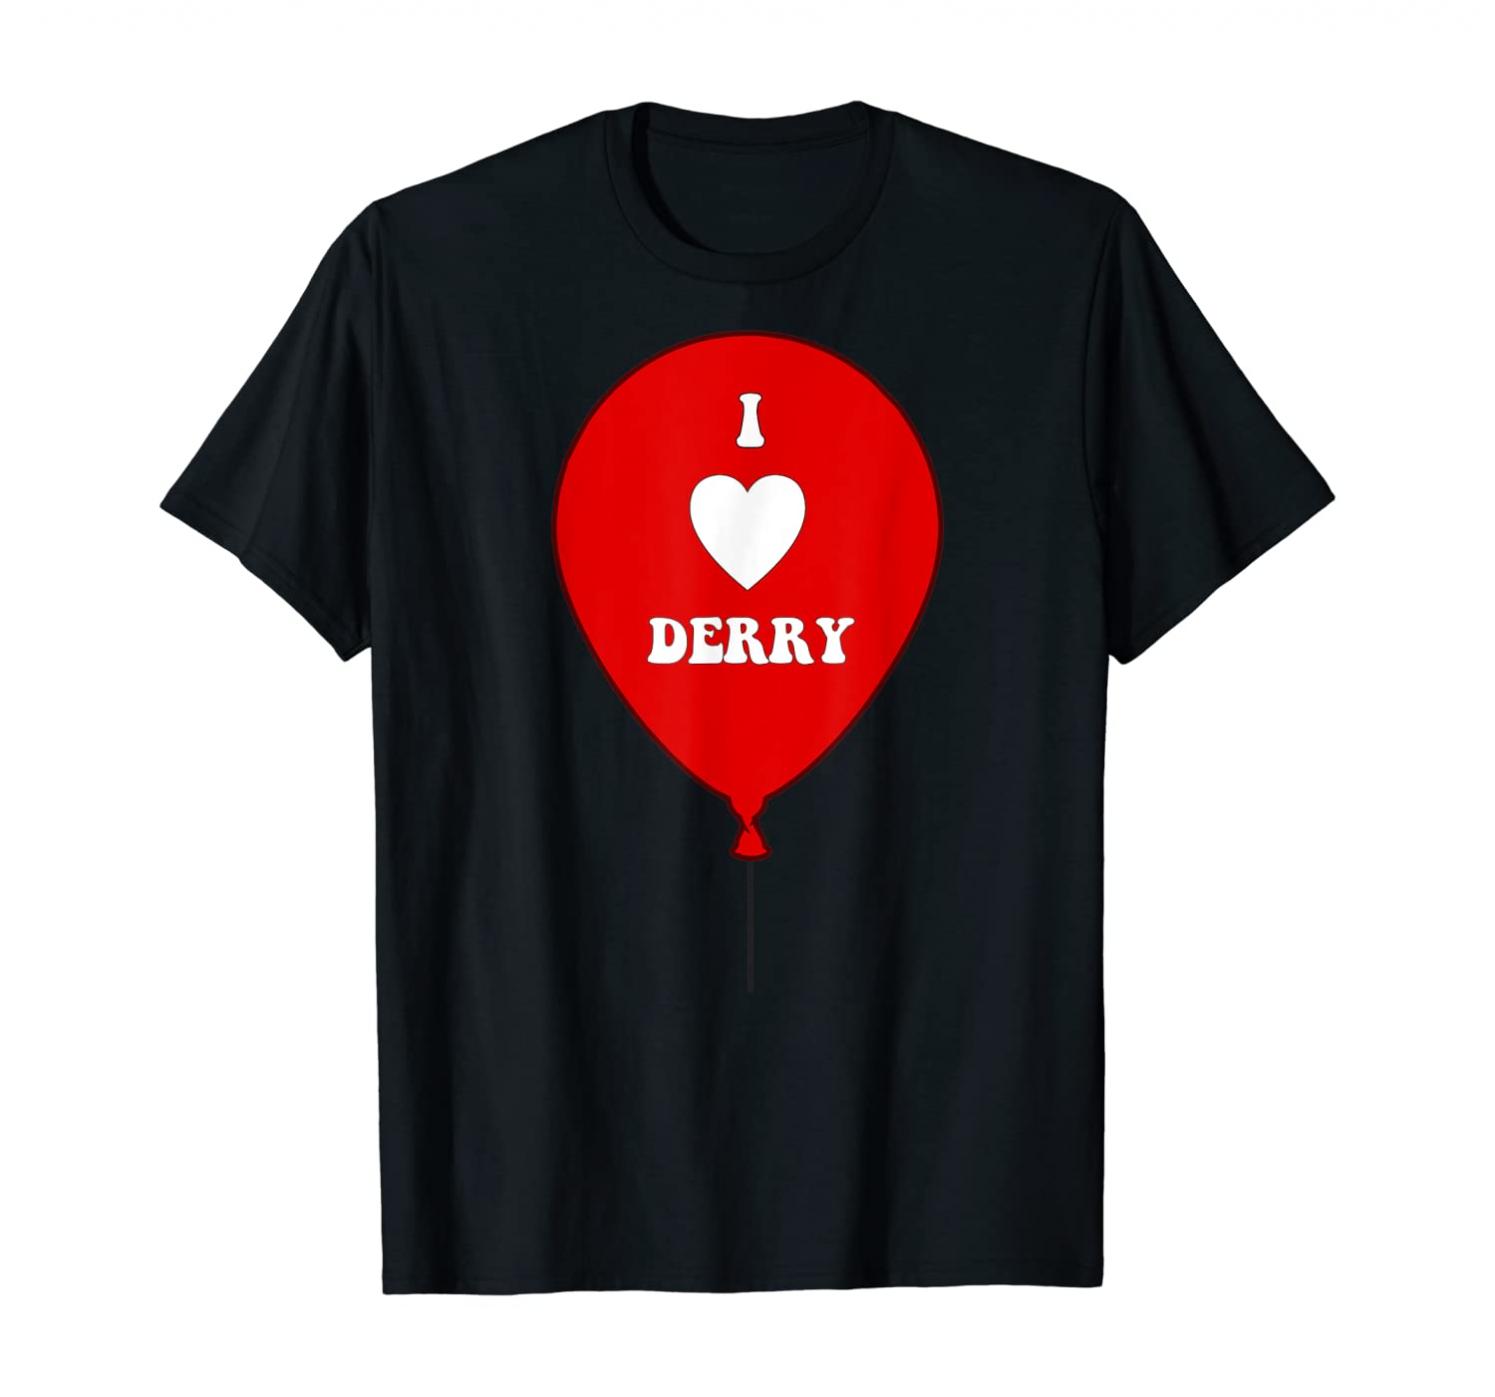 I LOVE DERRY on Red Balloon. I Heart Derry, Maine